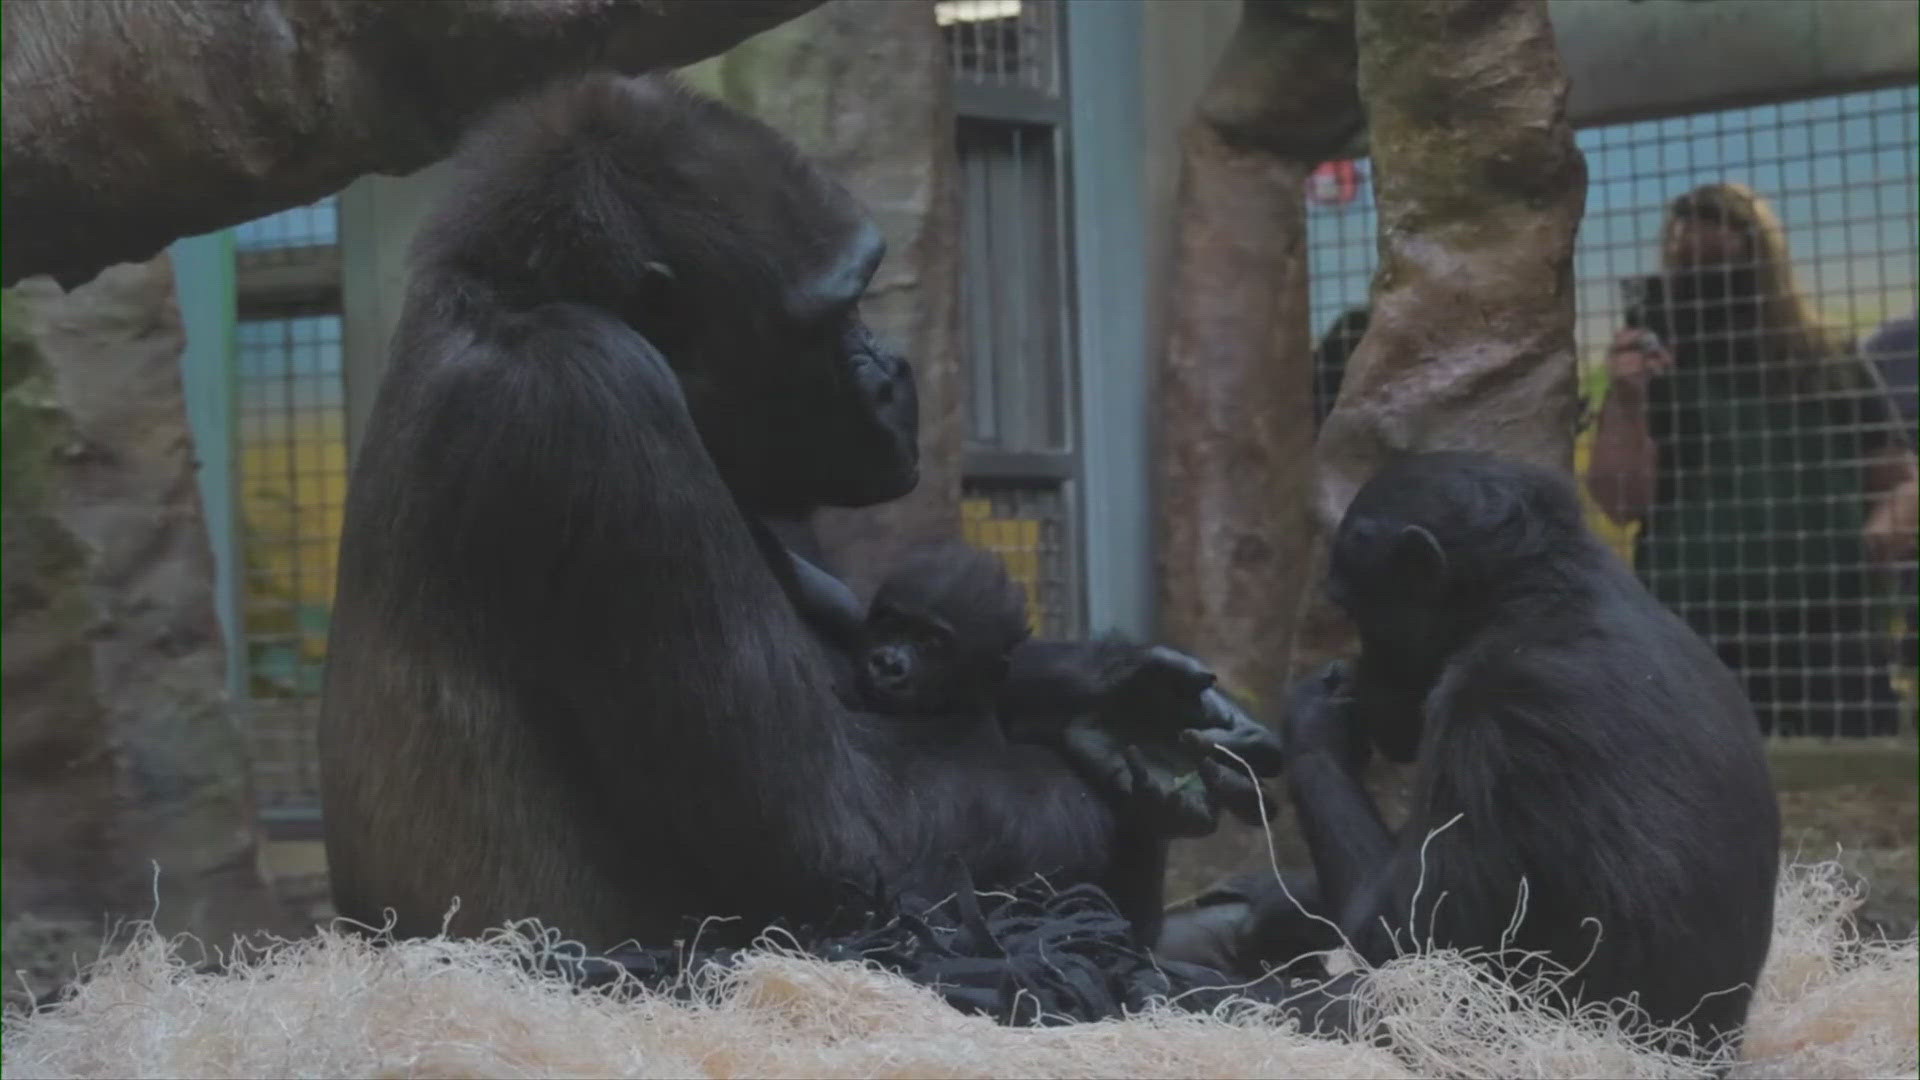 Jameela will get to go outside with the gorilla family for the first time since her arrival at the Cleveland Zoo.